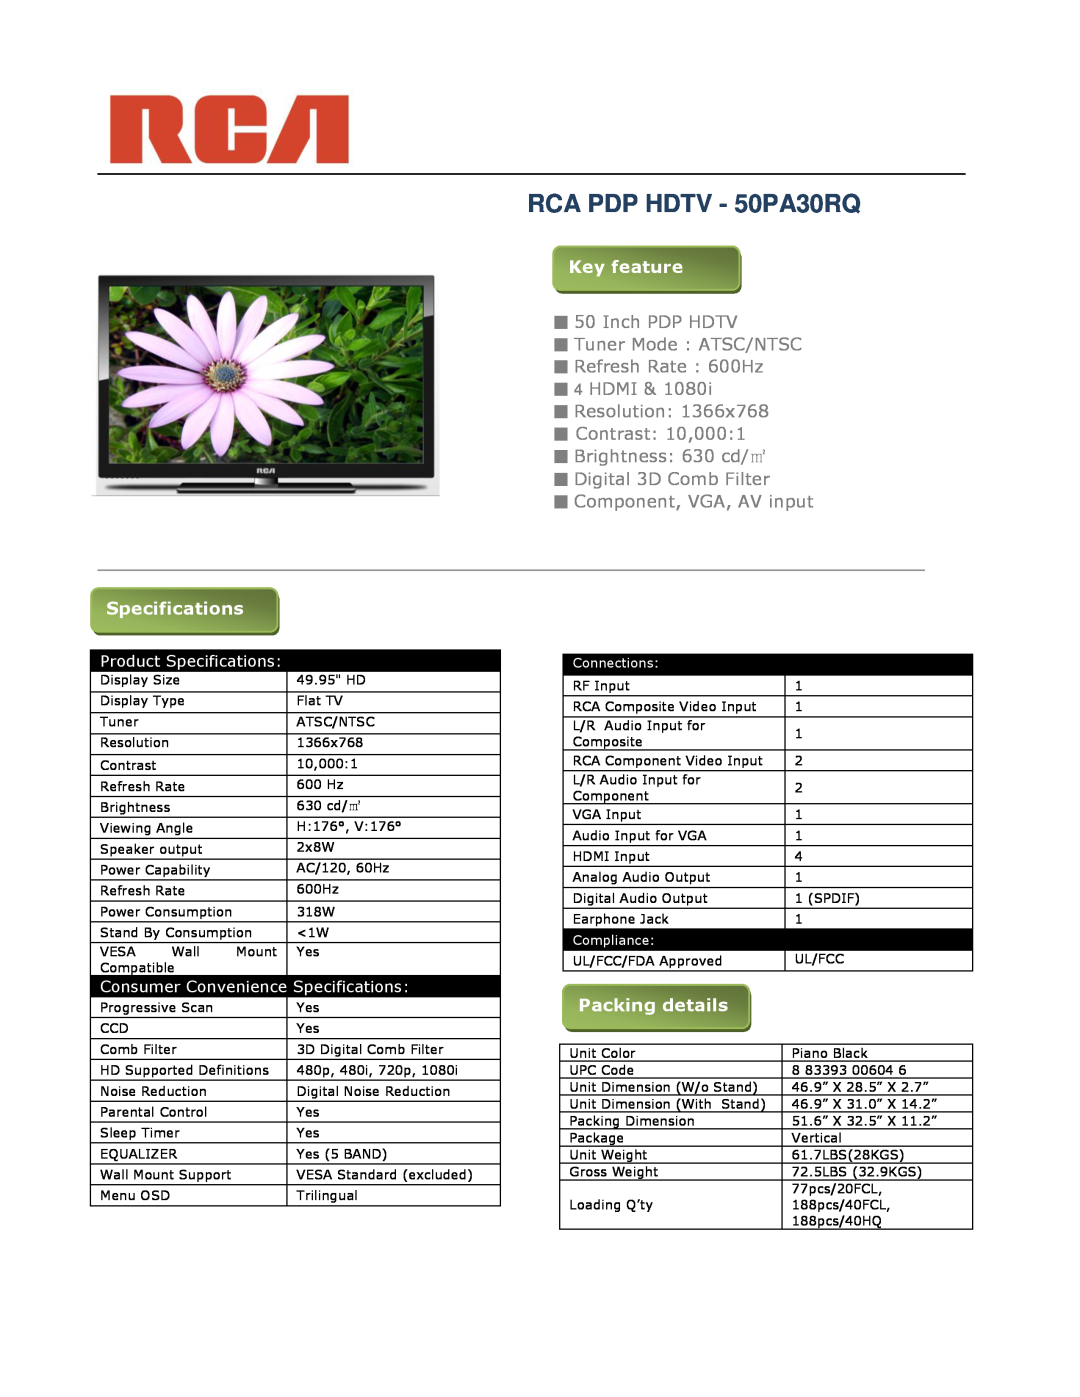 RCA RCA PDP HDTV - 50PA30RQ, Key feature, Inch PDP HDTV Tuner Mode ATSC/NTSC Refresh Rate 600Hz 4 HDMI, Specifications 